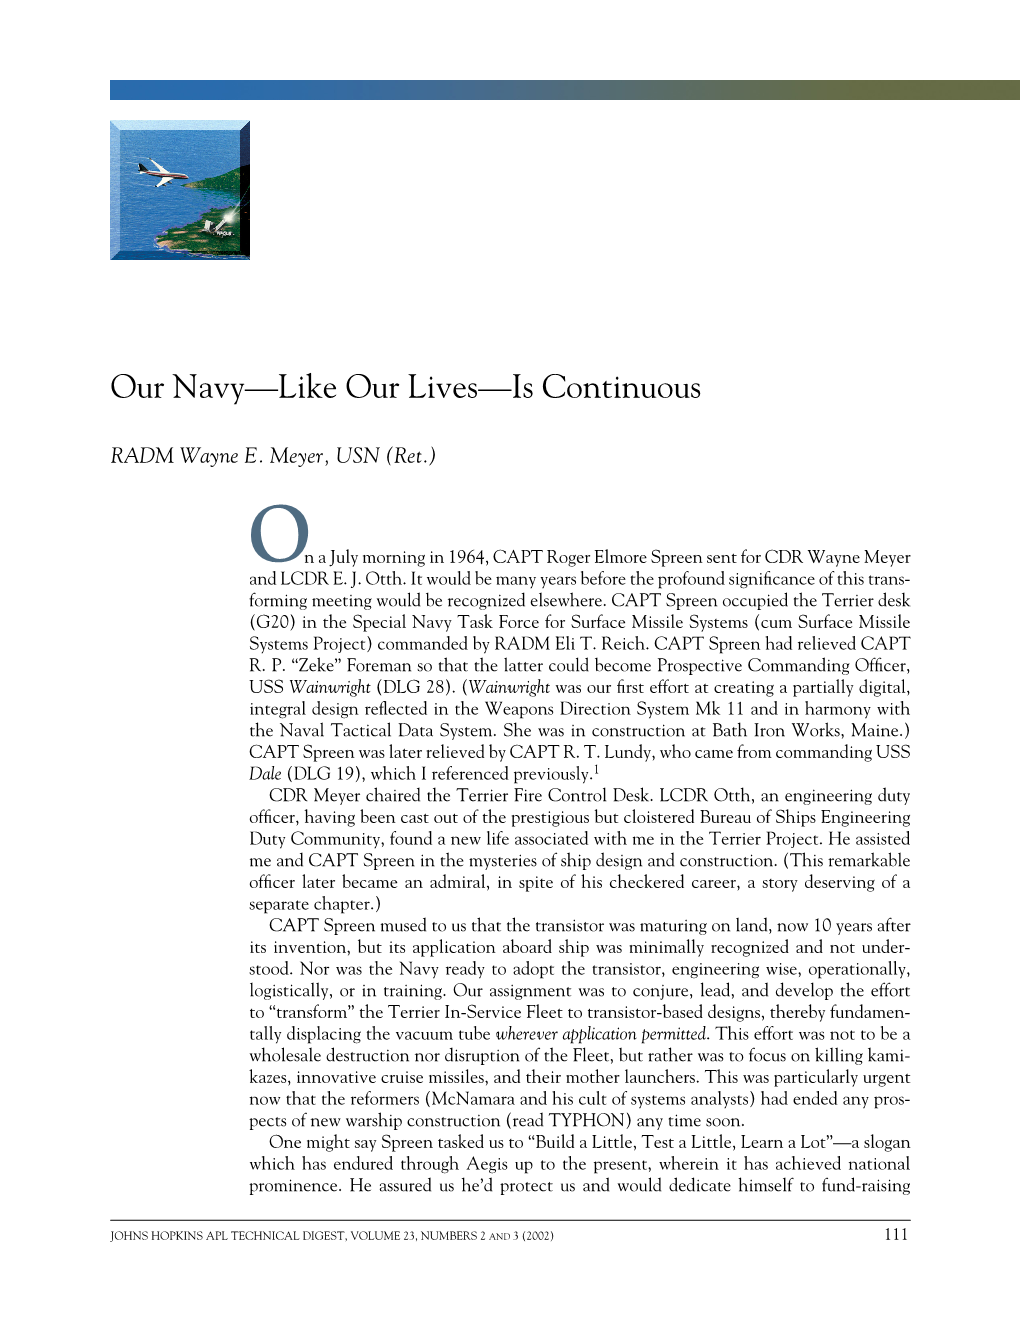 Our Navy—Like Our Lives—Is Continuous